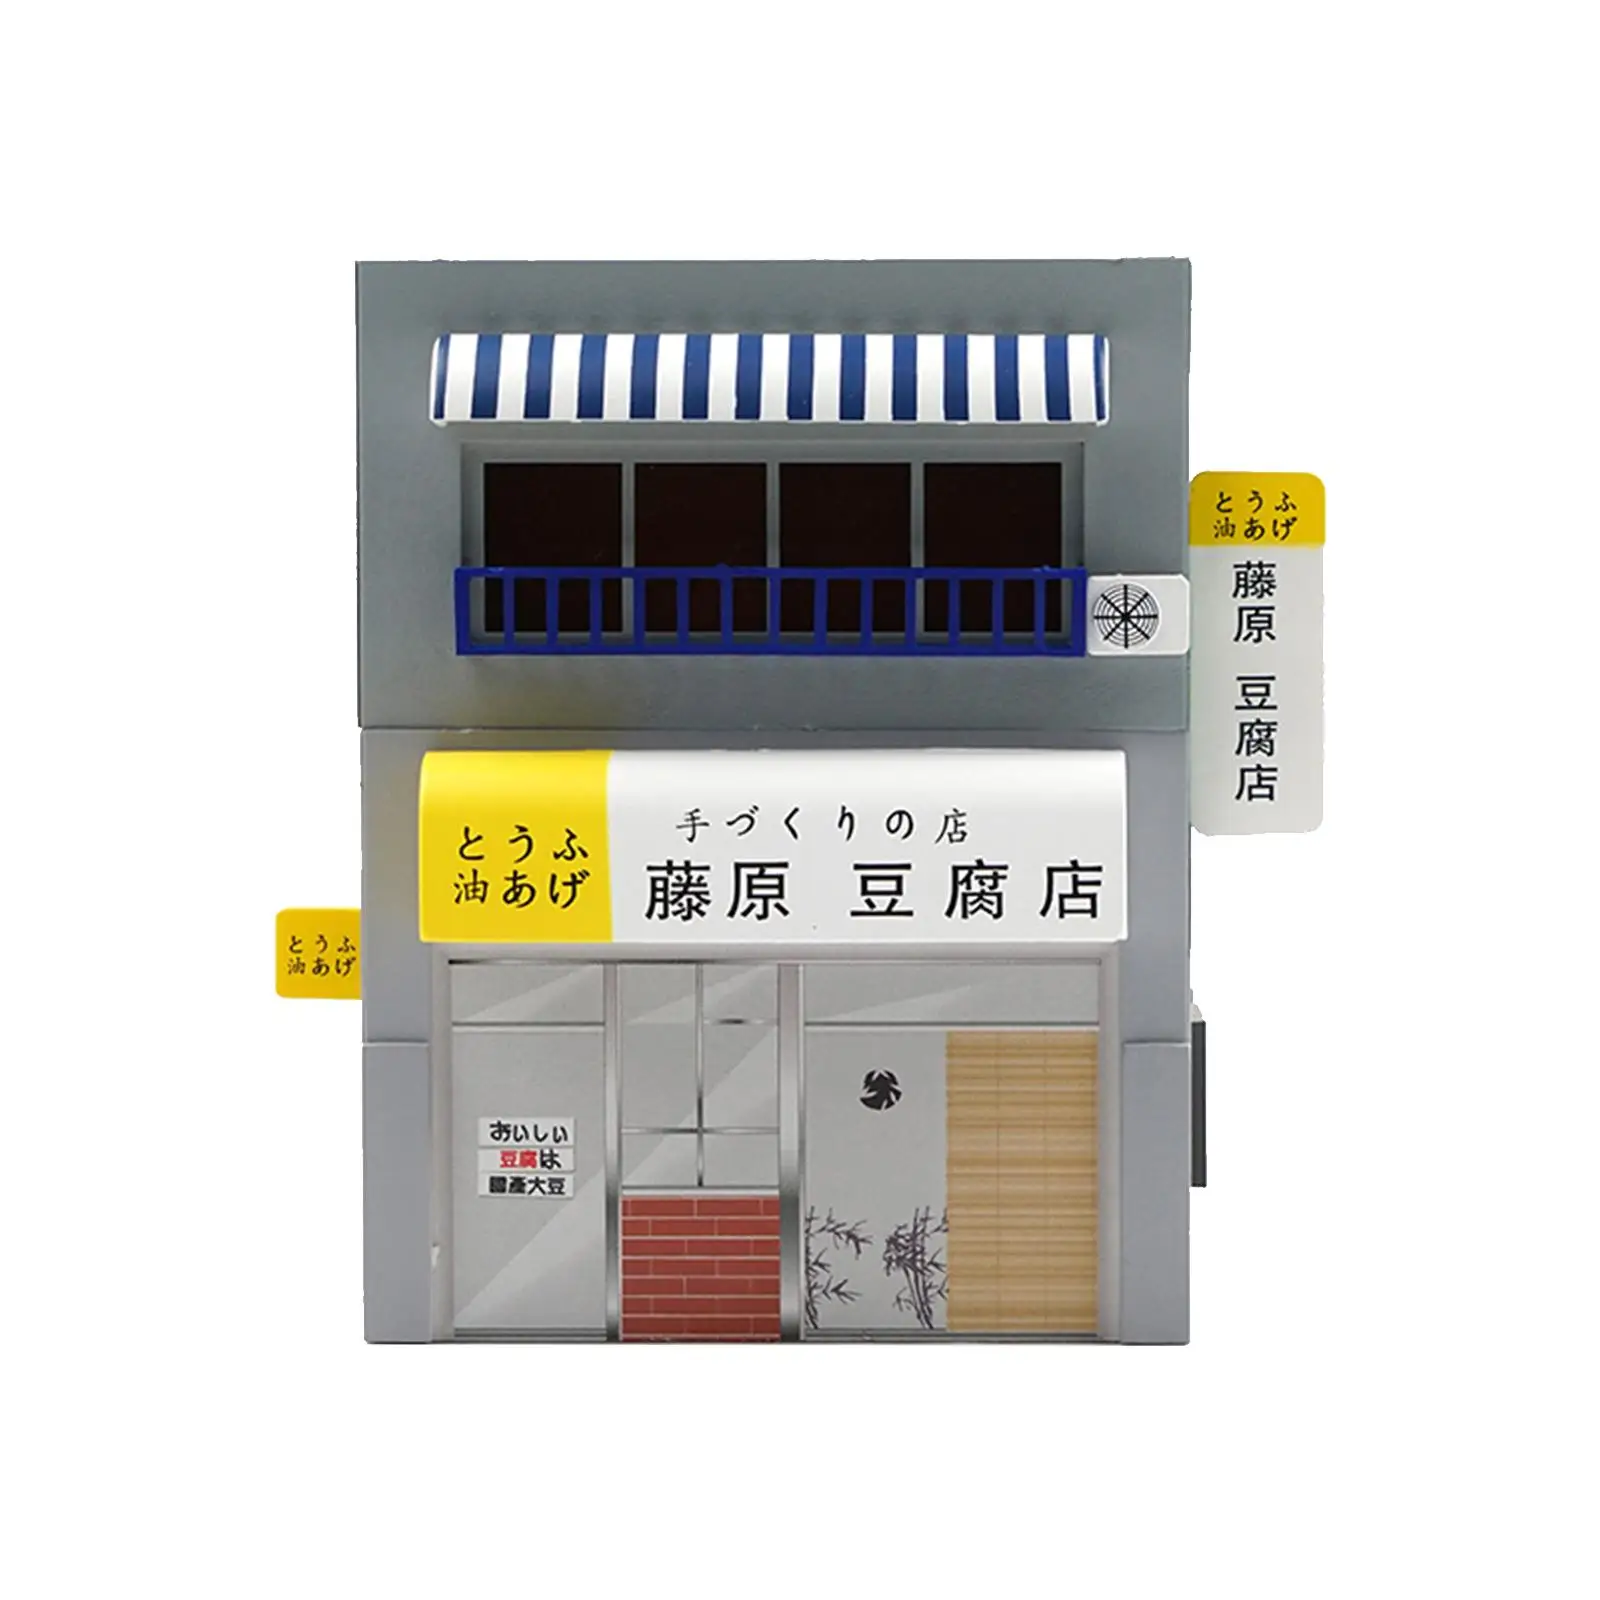 1/64 Tofu Shop Diorama Model Architectural Movie Props Desktop S Gauge Collection Scenery Scenery Store Townscape Decoration